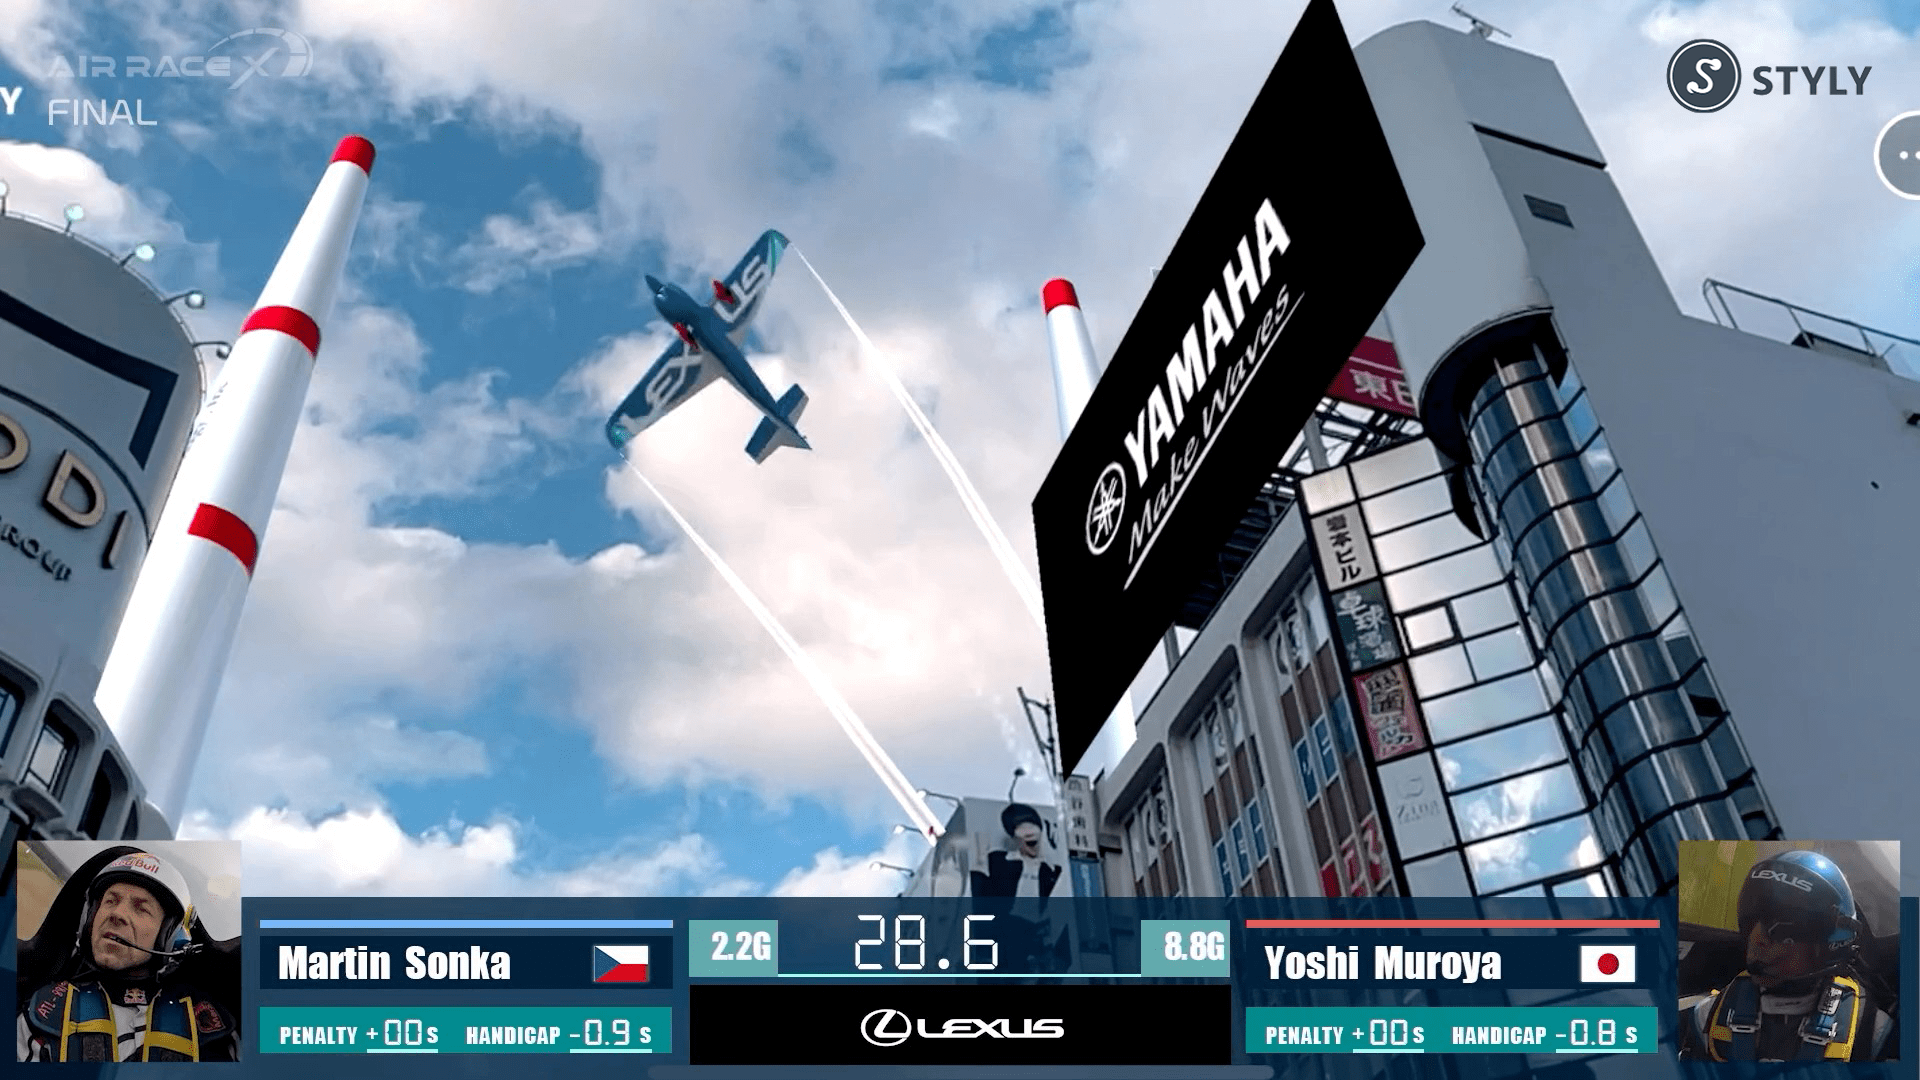 Air Race X: AR Showcase shows an exciting future for sporting events